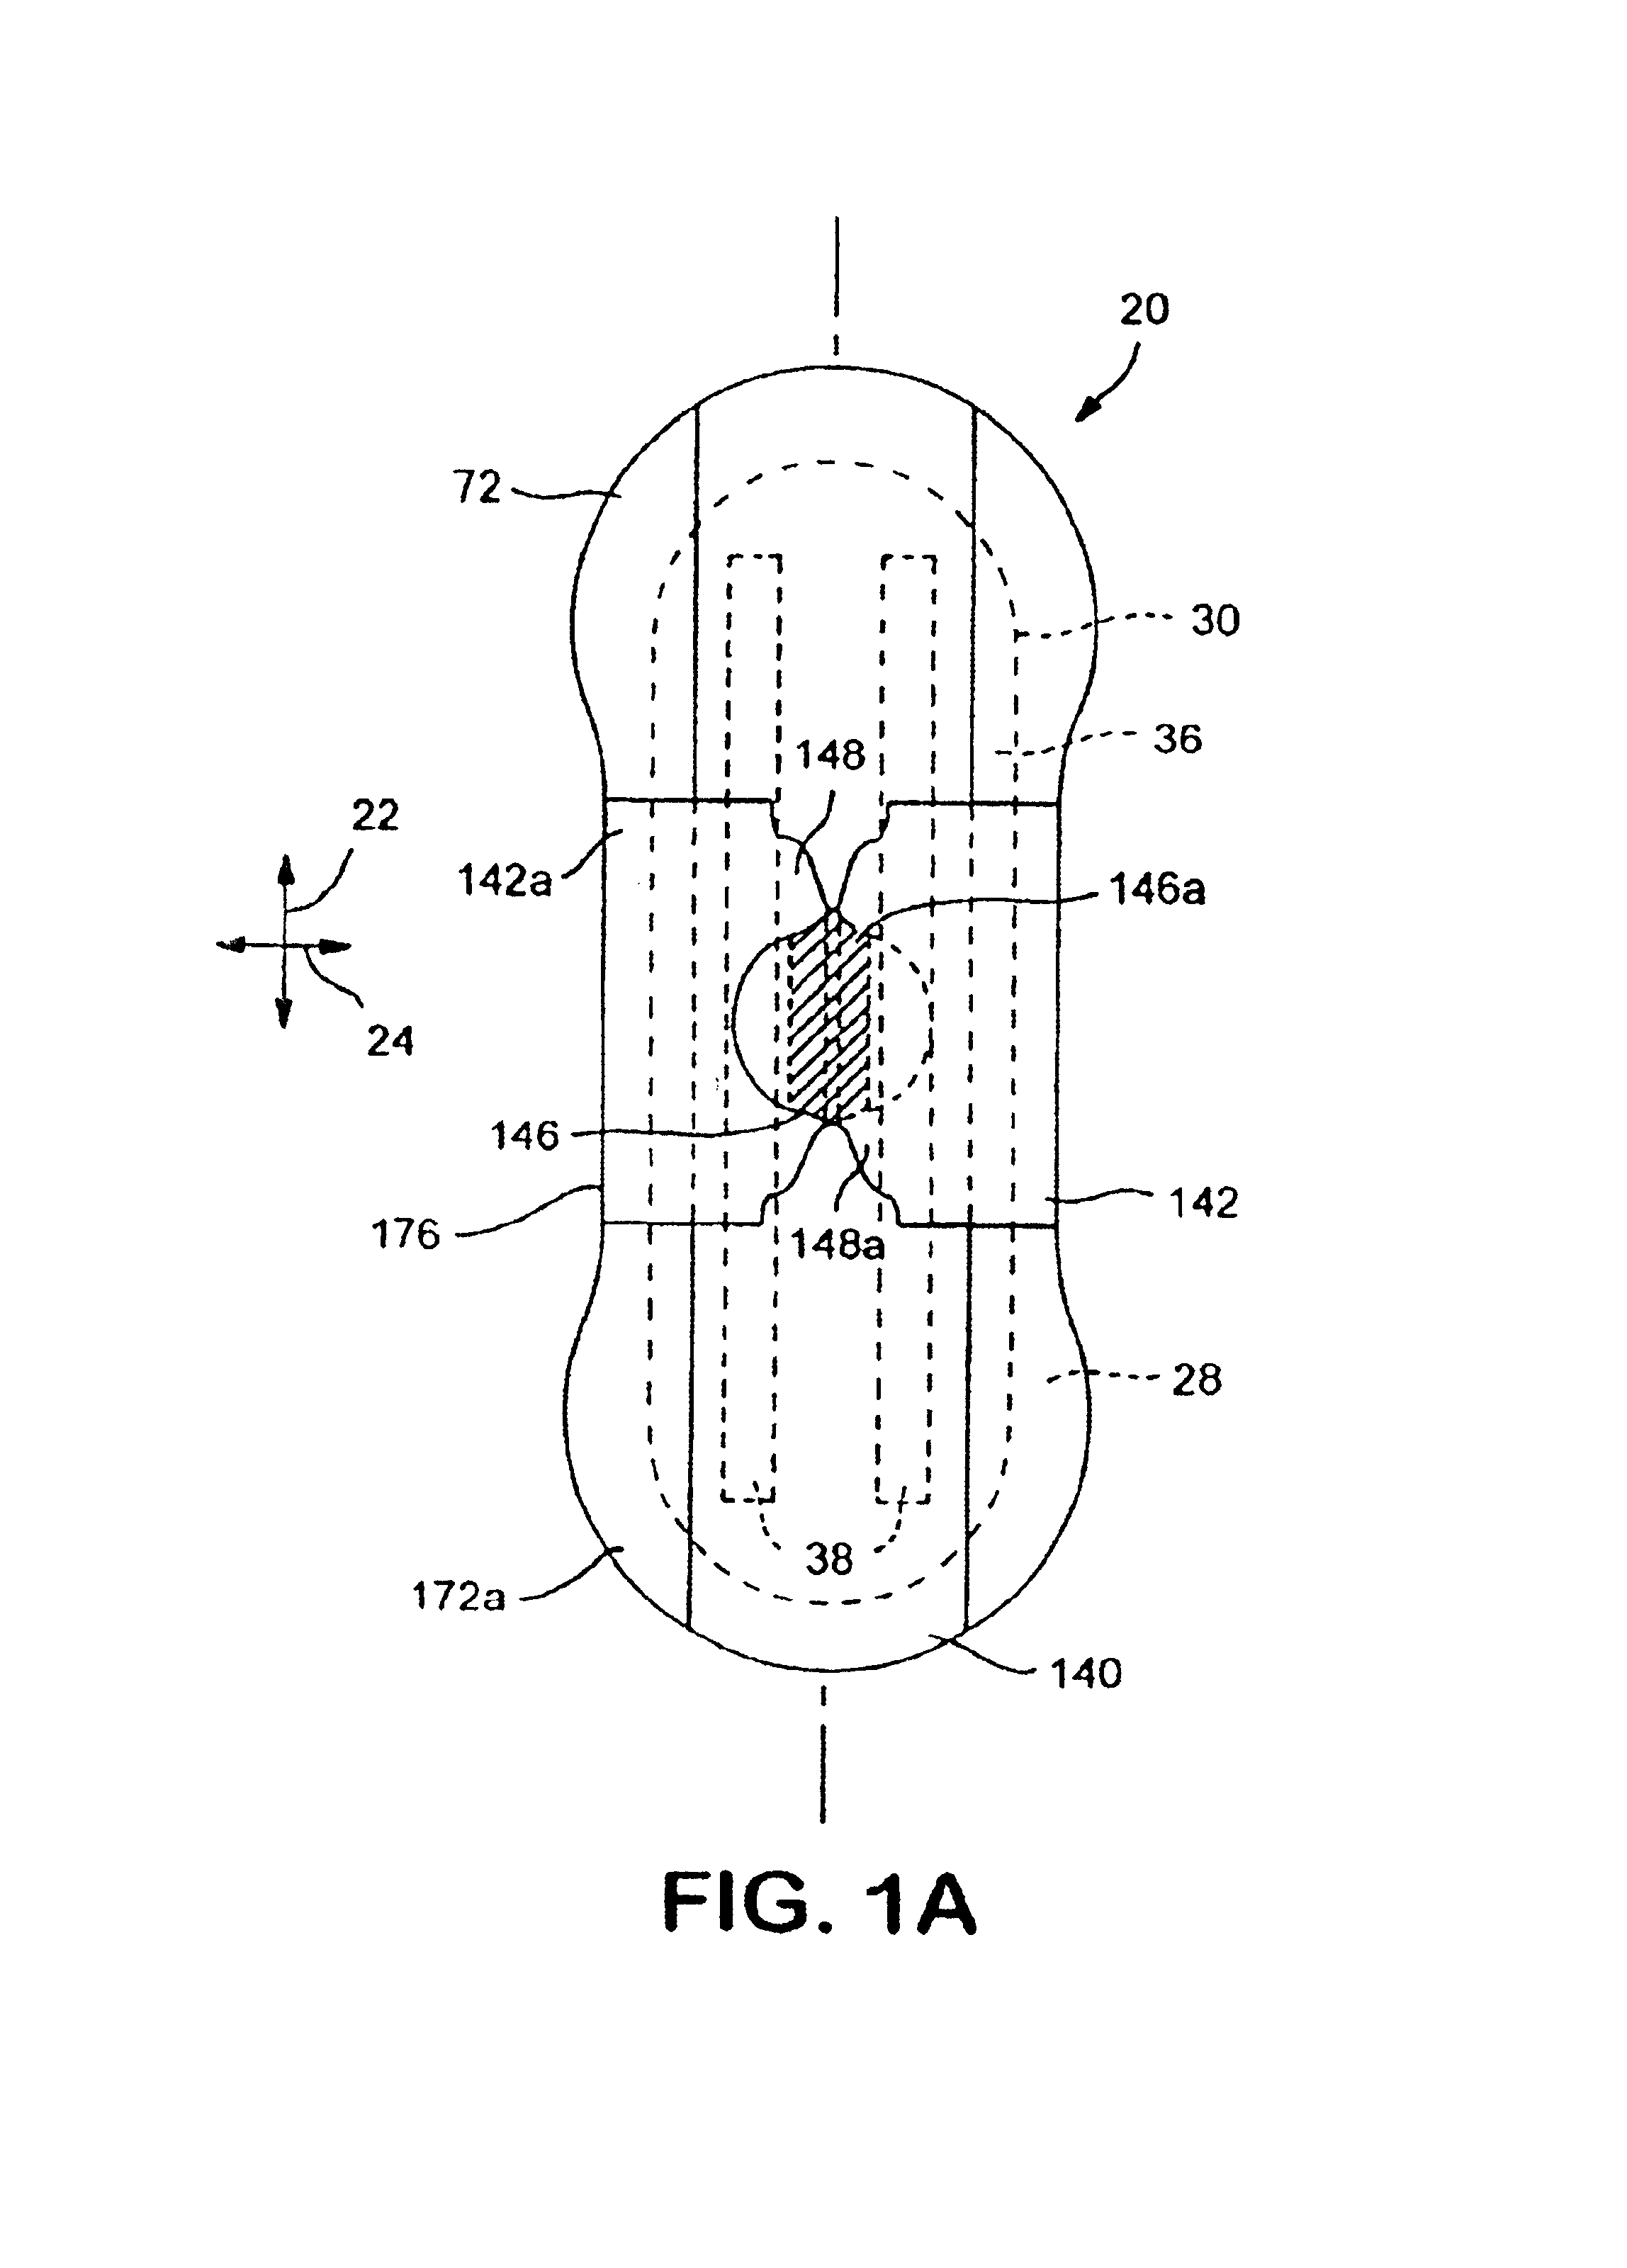 Absorbent structures with selectively placed flexible absorbent binder